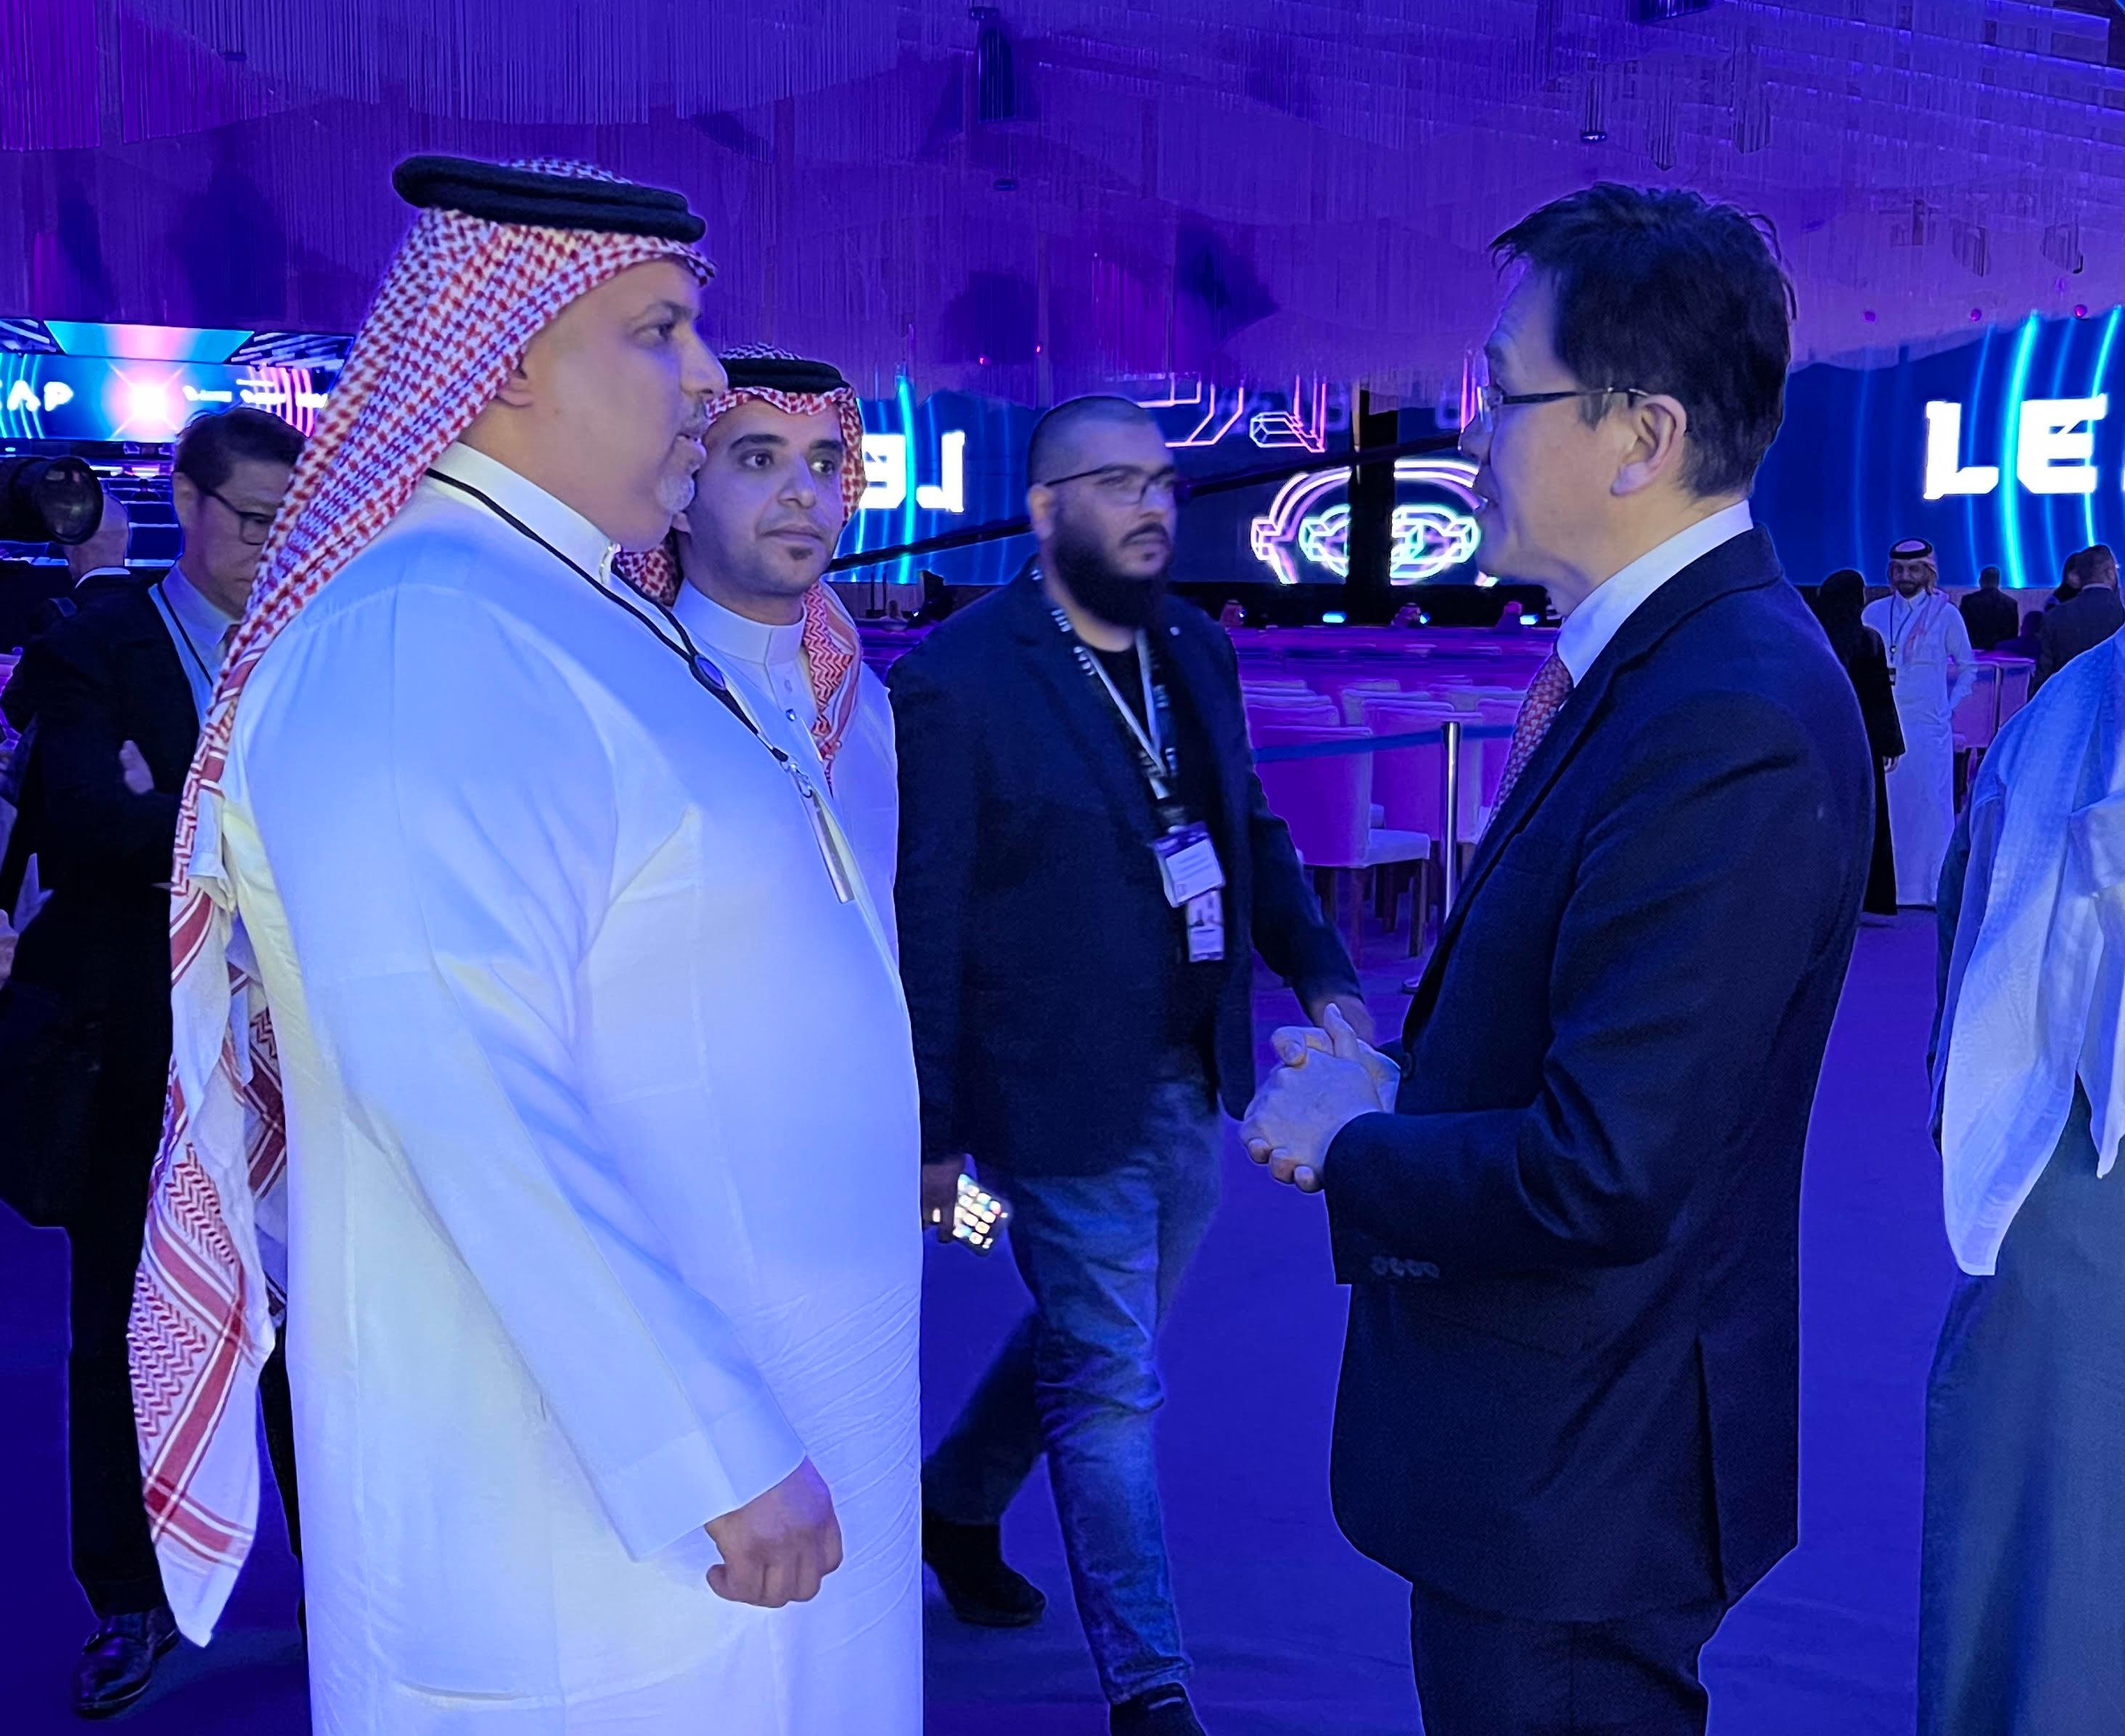 The Secretary for Innovation, Technology and Industry, Professor Sun Dong (first right), met with the Deputy Minister of Investment of Saudi Arabia, Mr Saleh Ali AlKhabti (first left), during the LEAP 2024 technology conference on March 4 (Riyadh time).